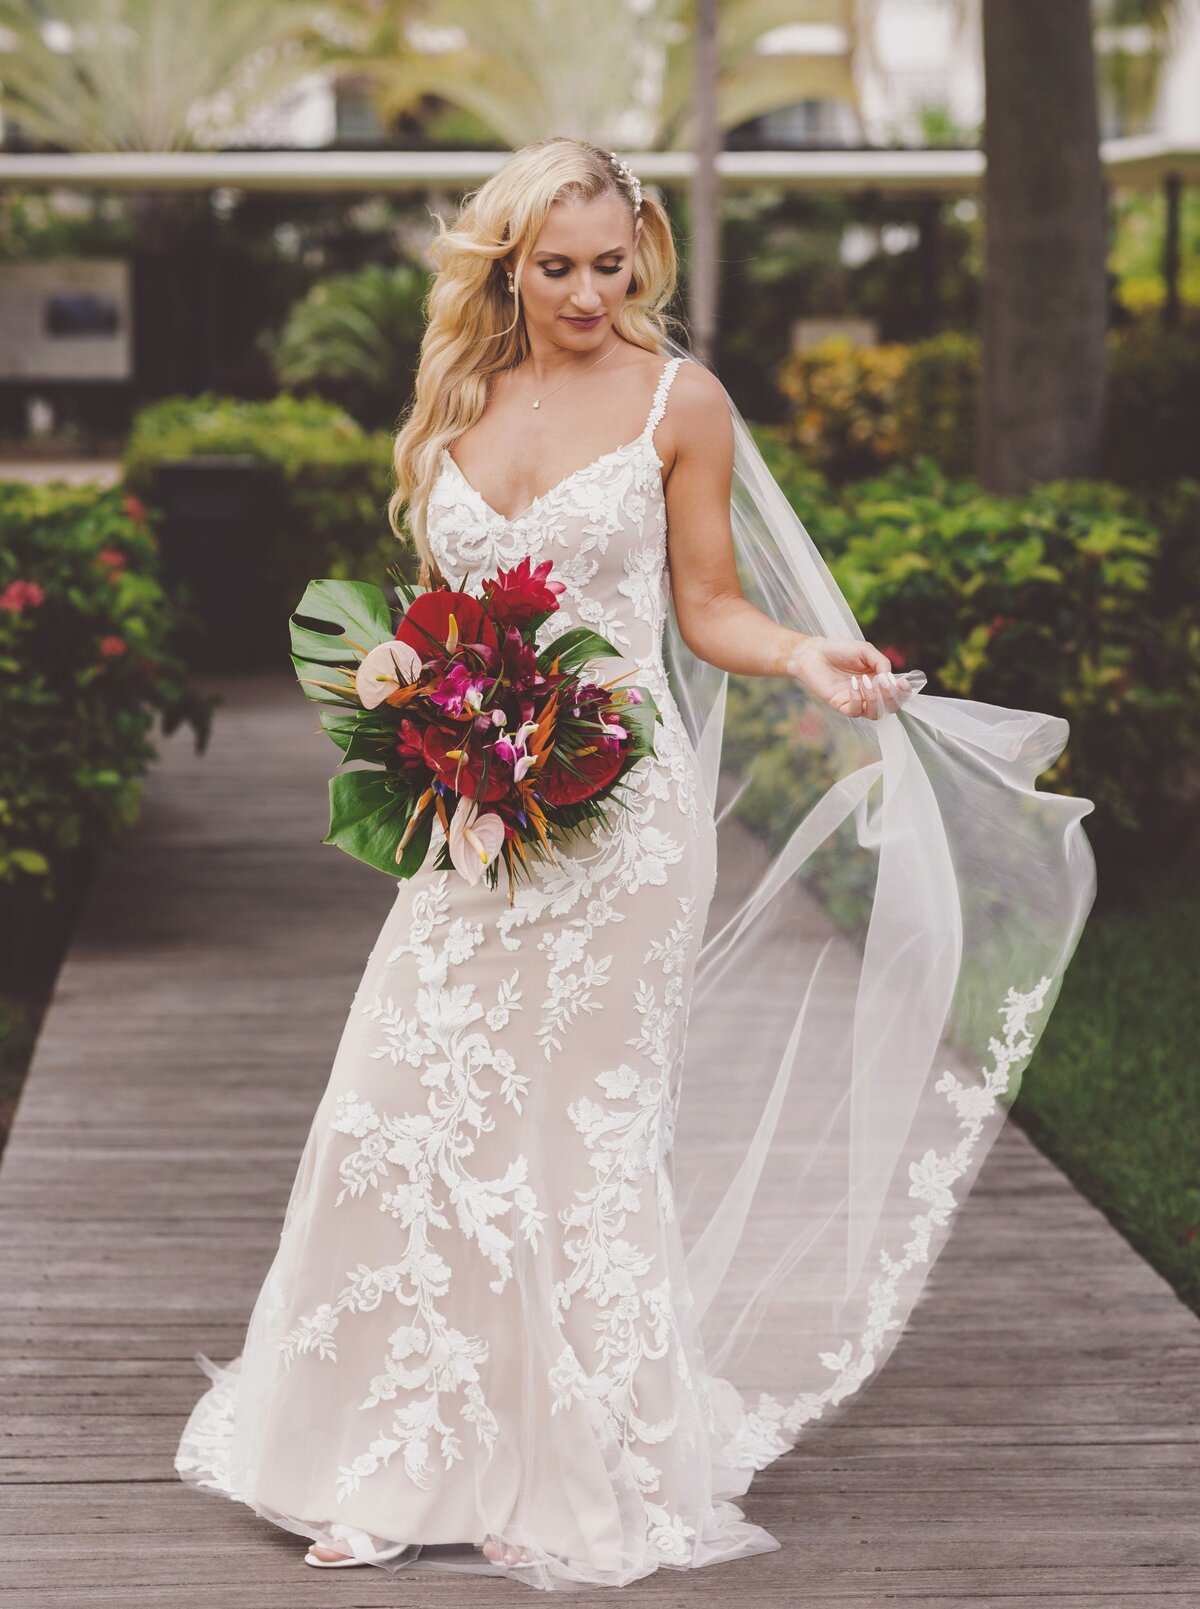 Editorial portrait of bride before wedding in Cancun